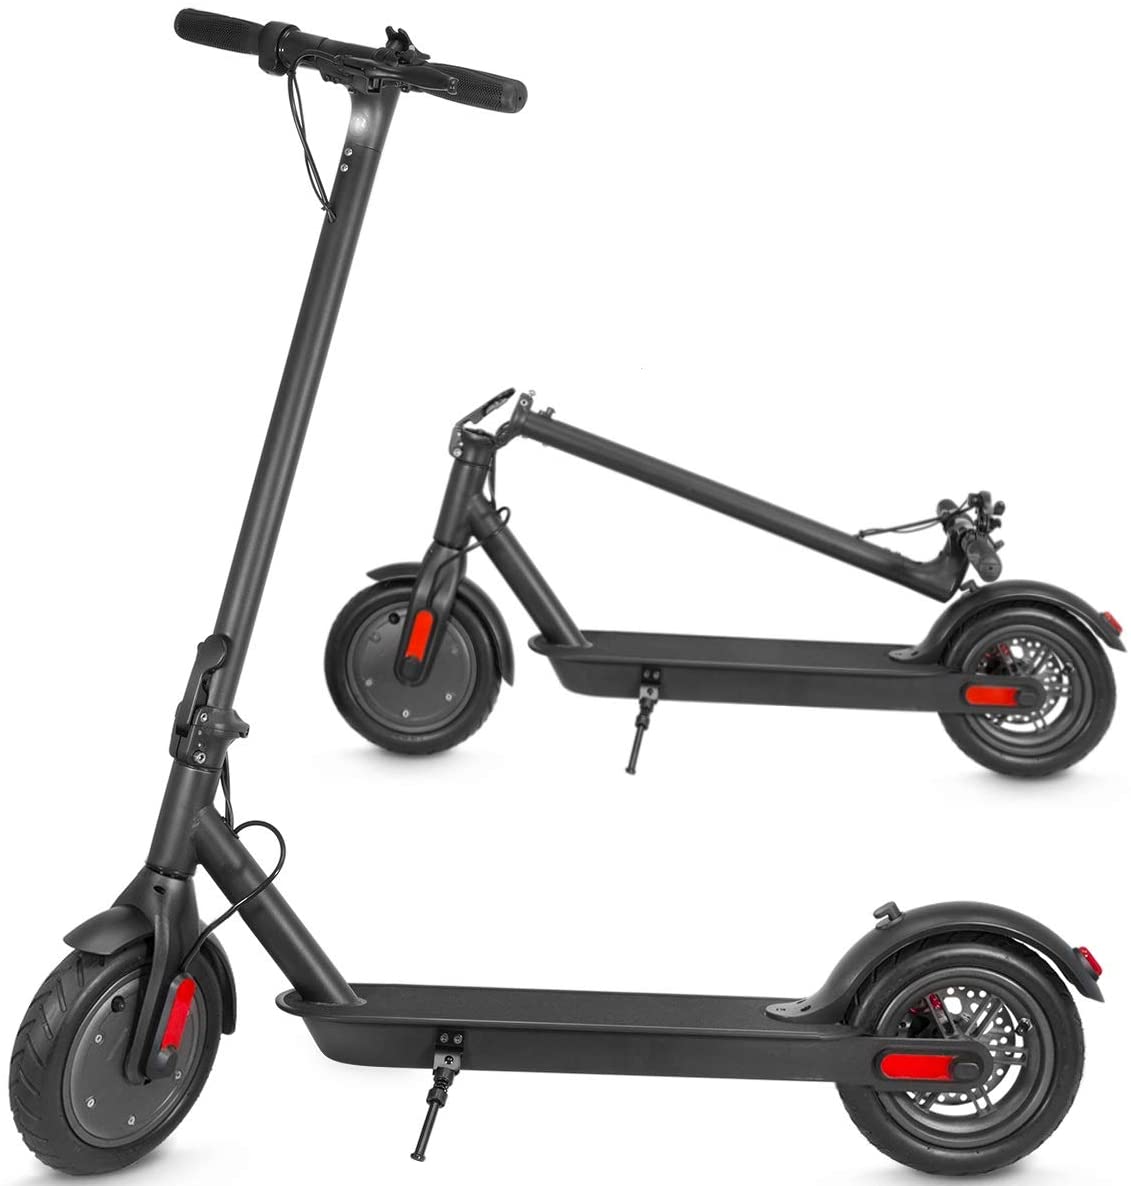 Do electric scooters go uphill?